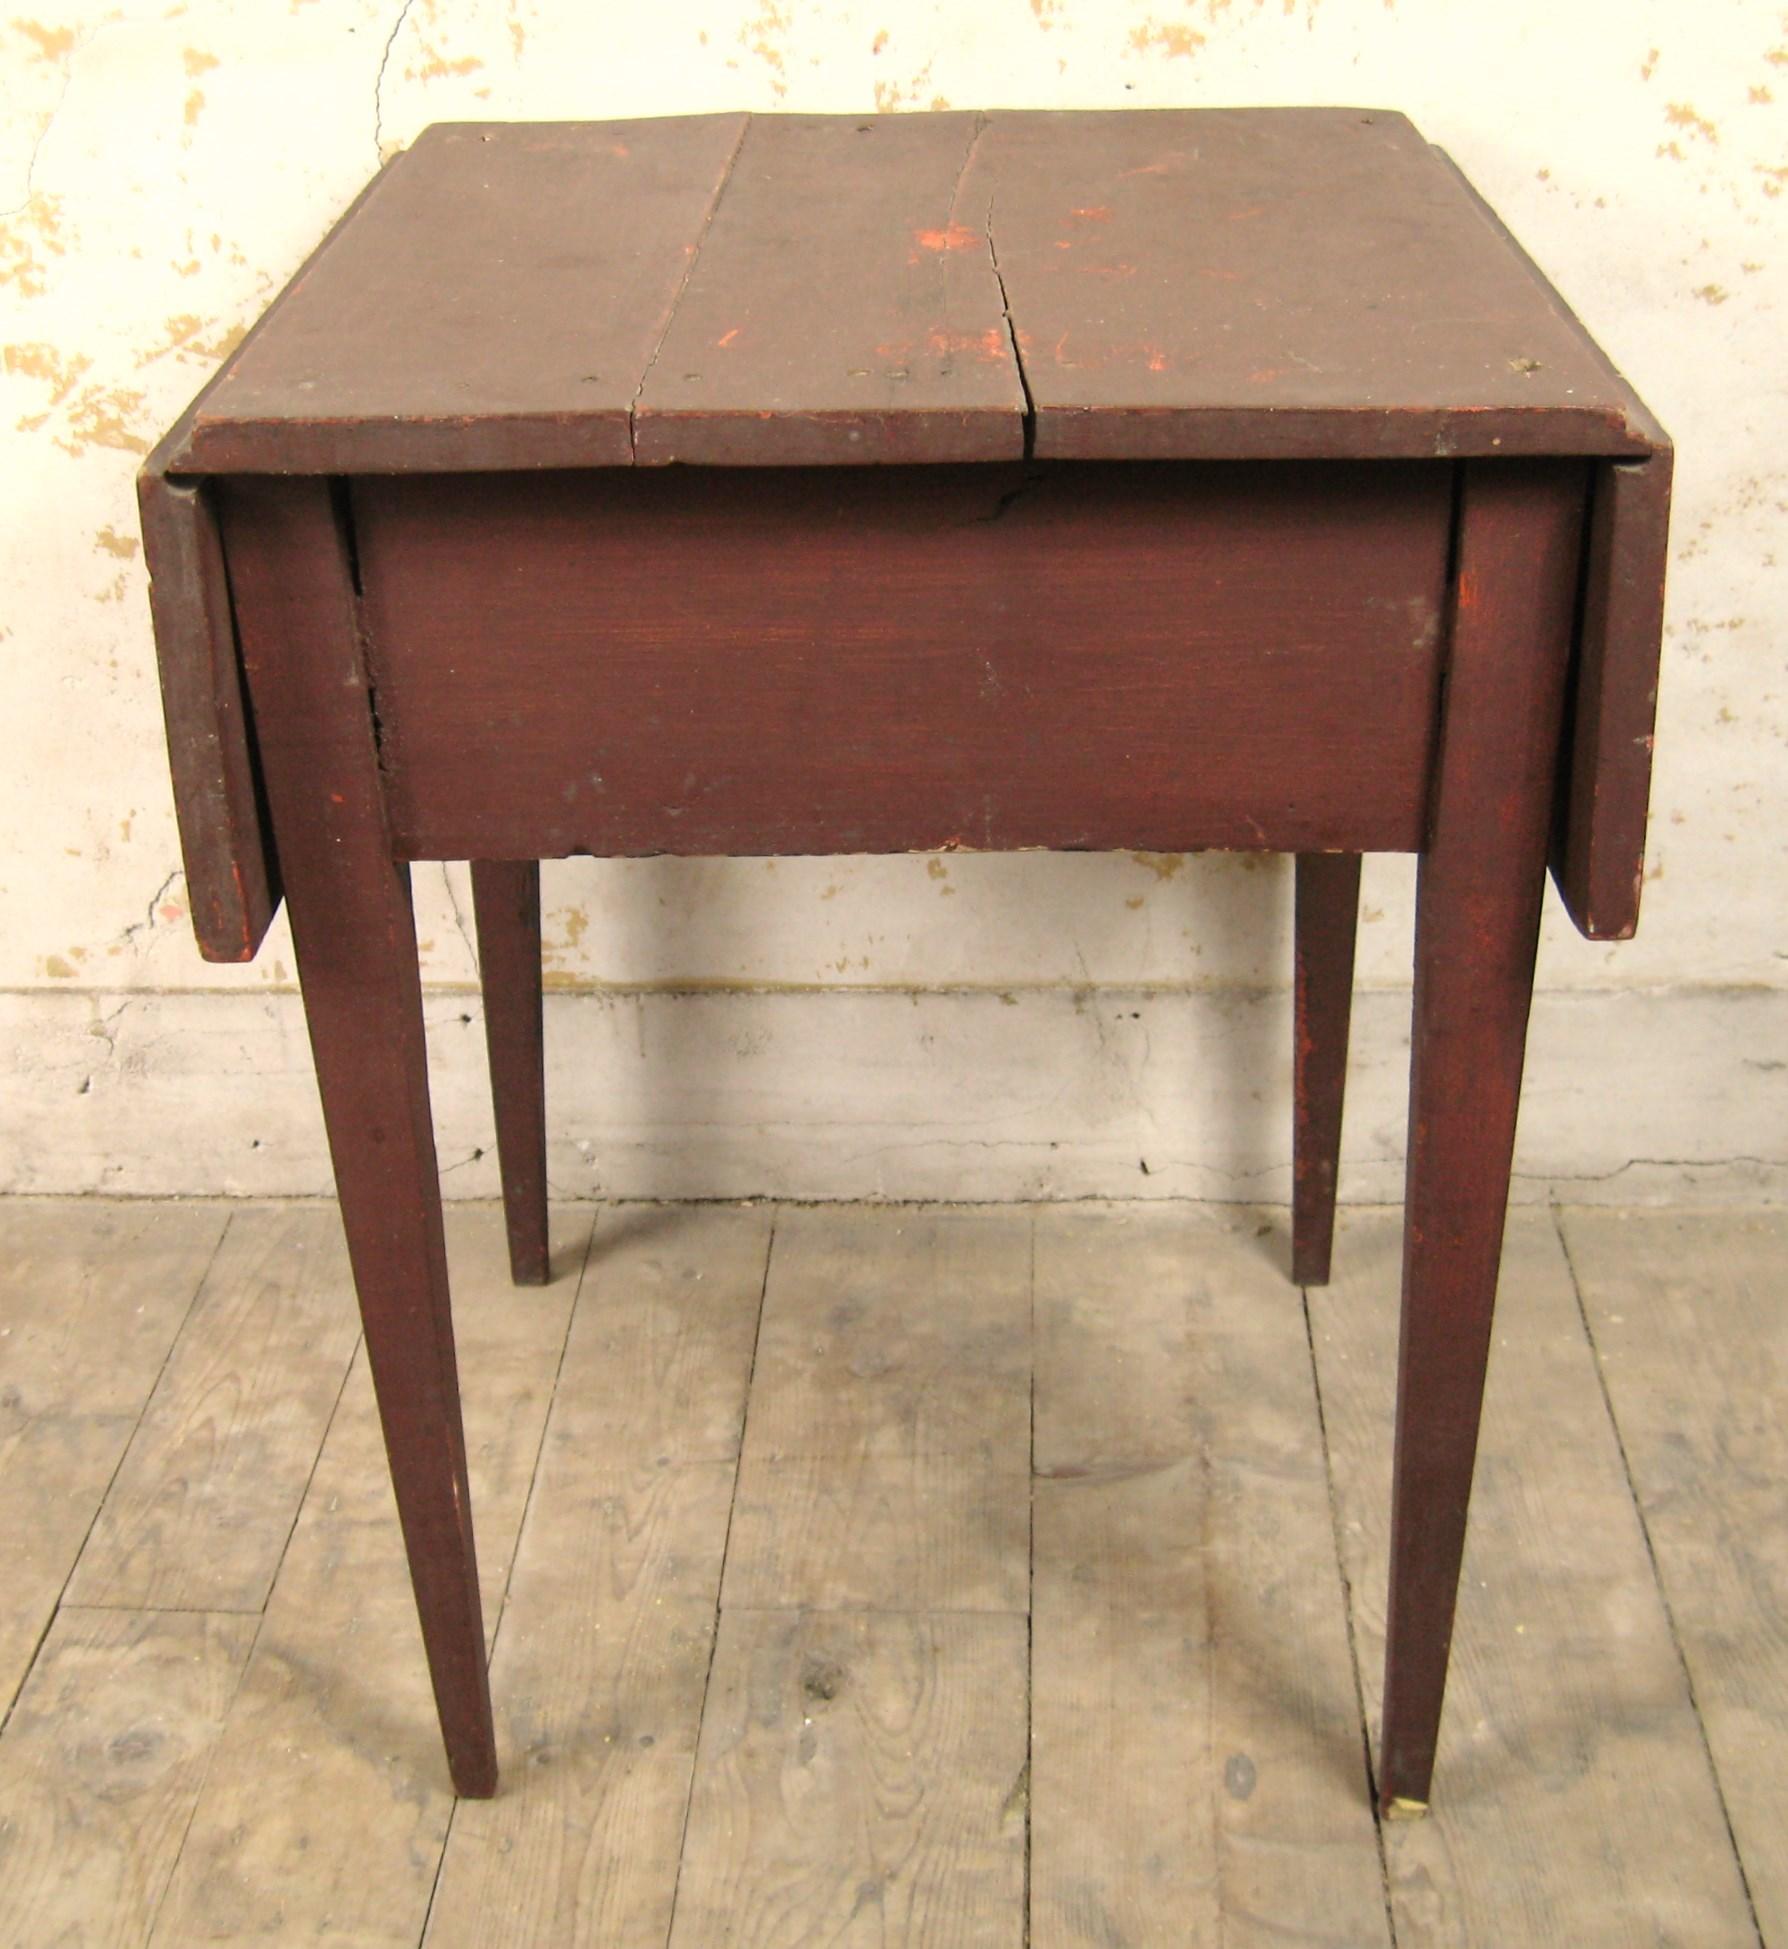 19th Century Primitive Farm workDrop leaf table with Tapered Leg 1